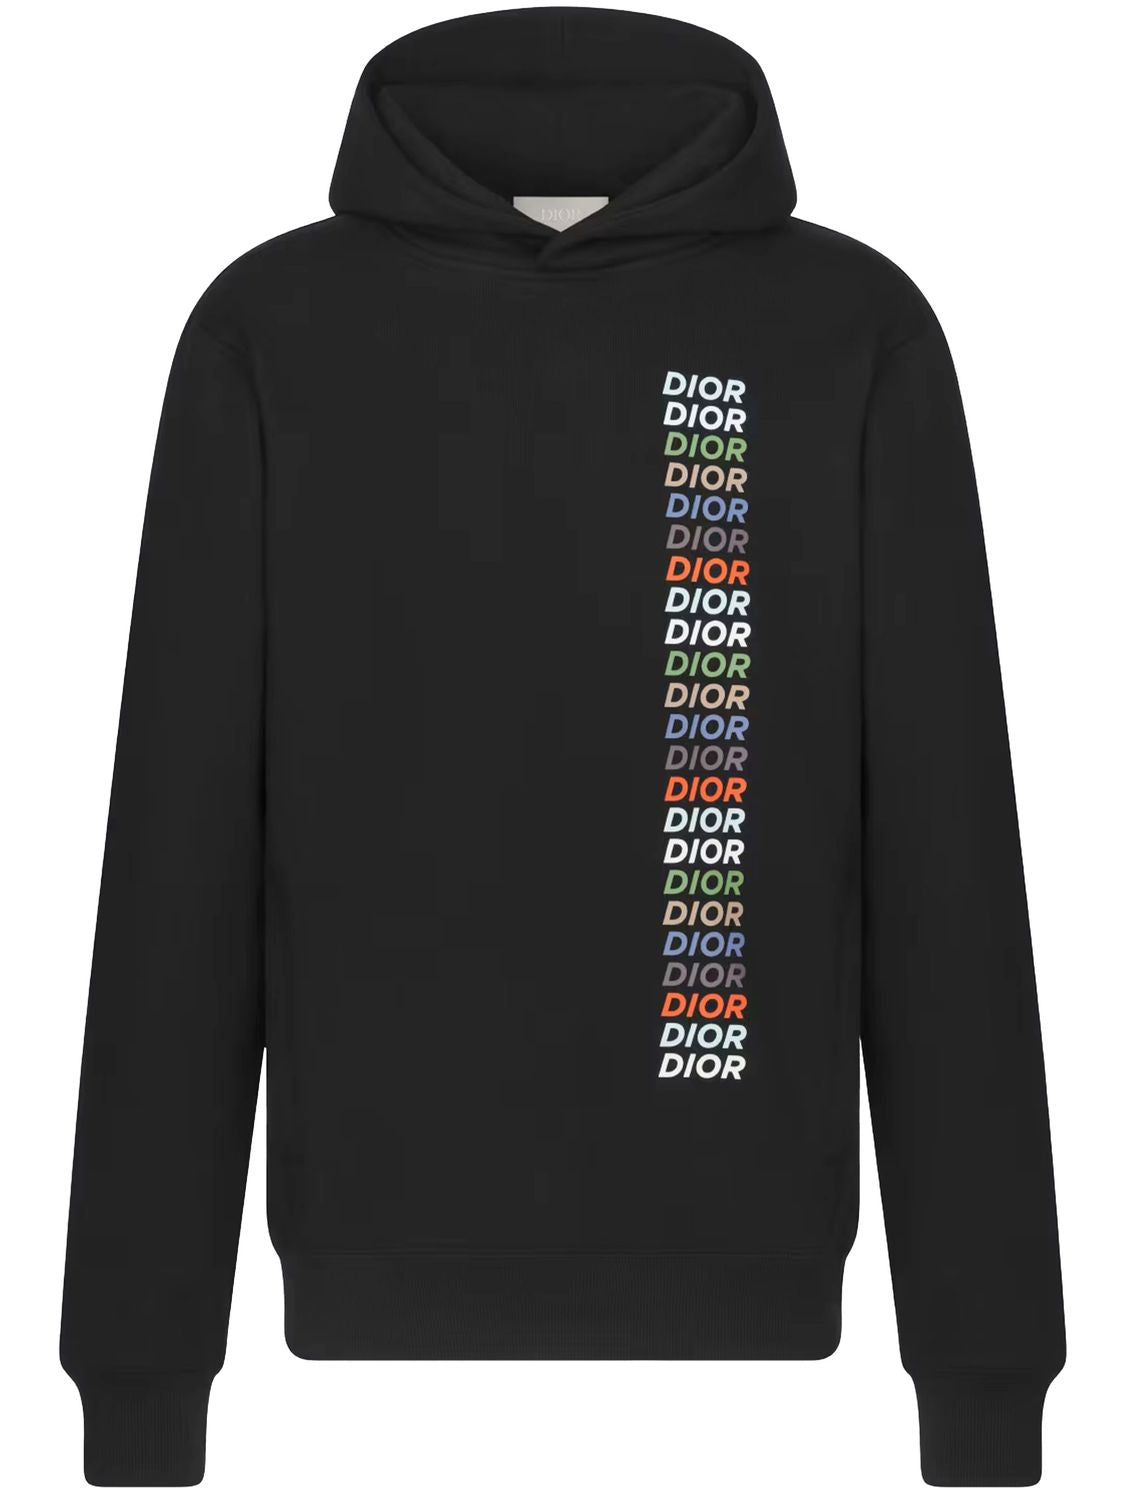 DIOR HOMME Relaxed Fit Black Dior Multi Hoodie for Men - 100% Cotton